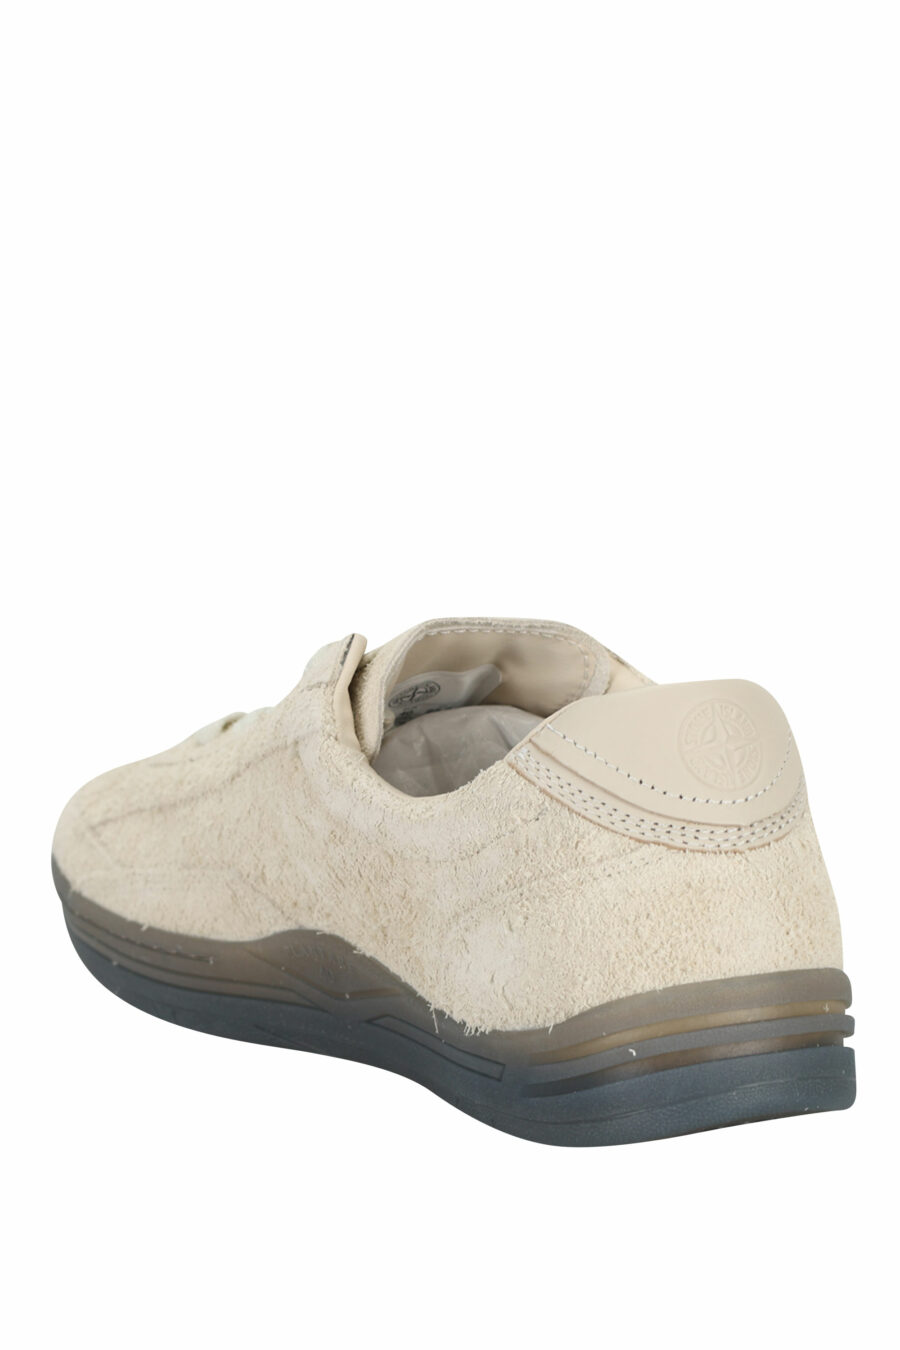 Beige trainers with minilogo and grey sole - 8052572915505 3